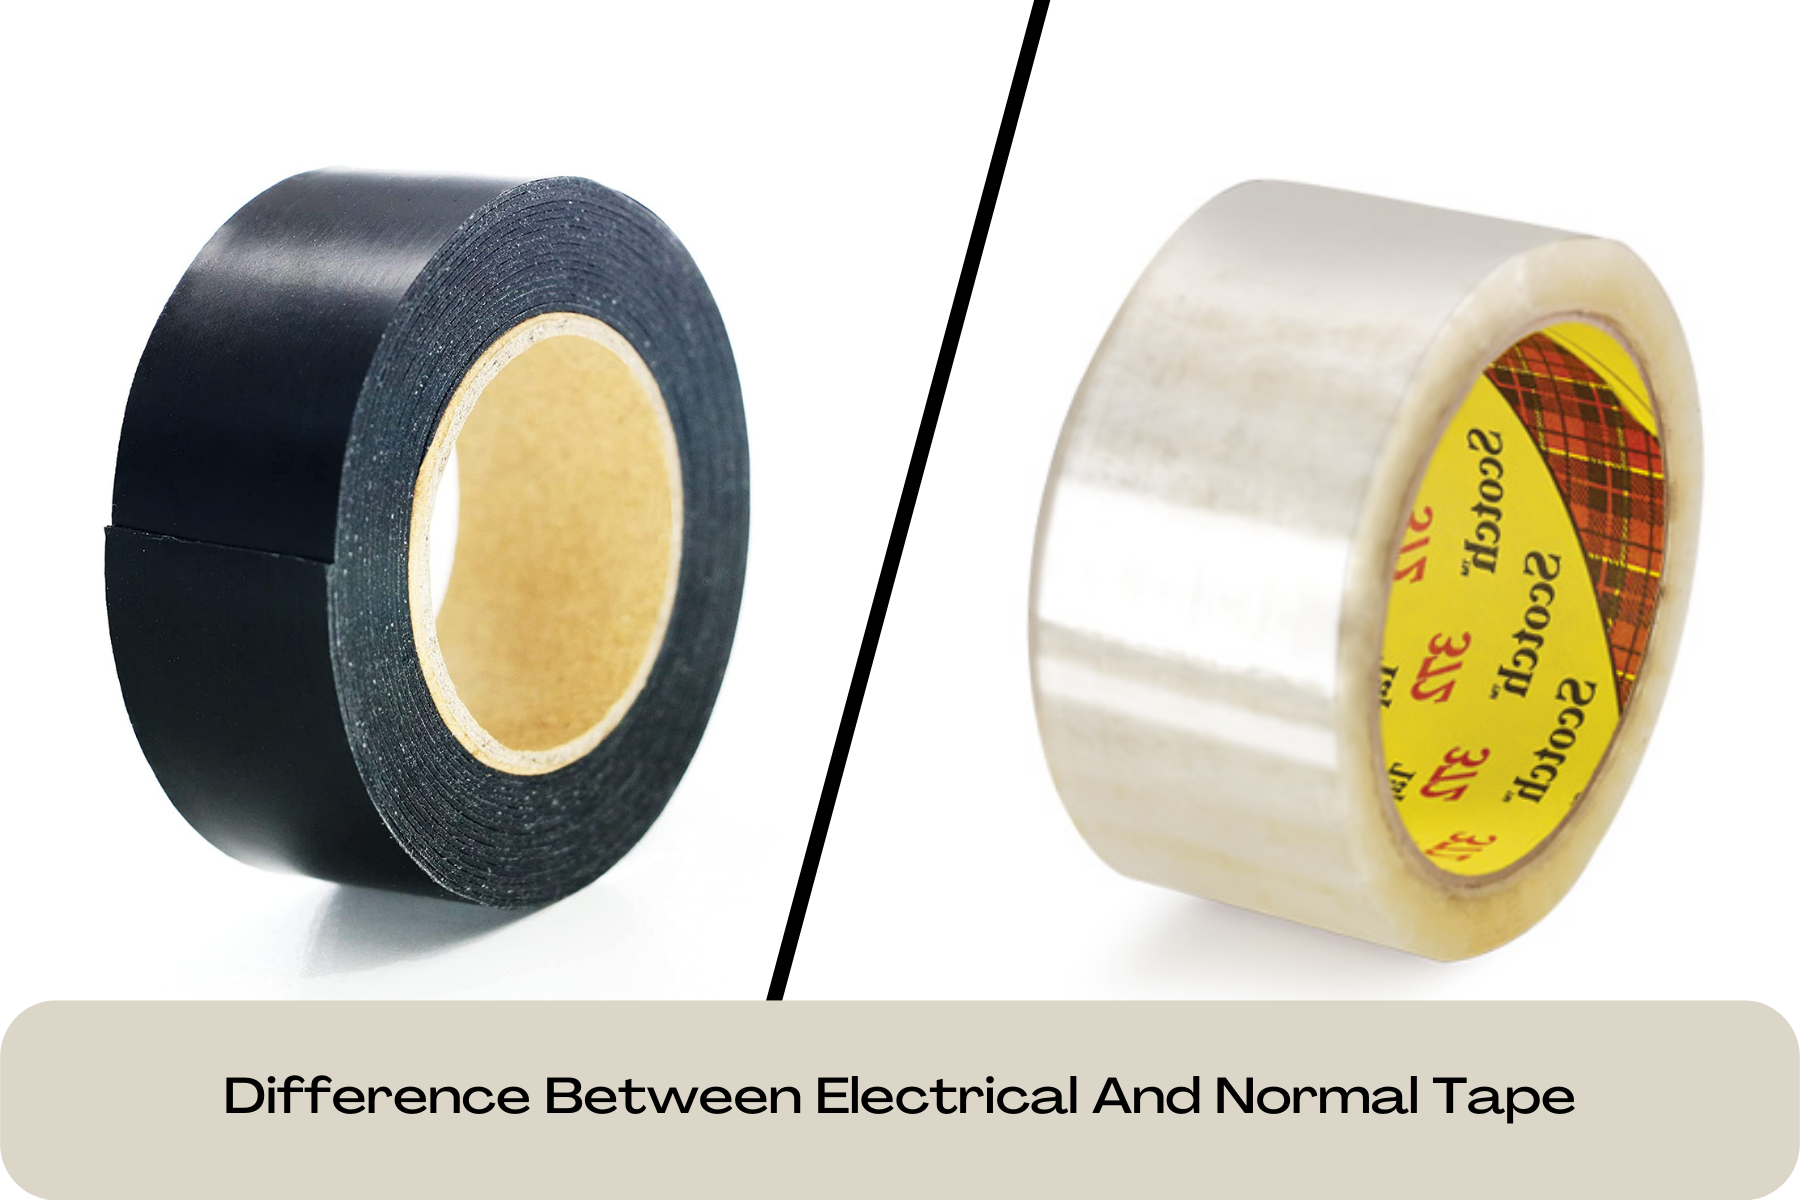 An electrical tape and a normal tape